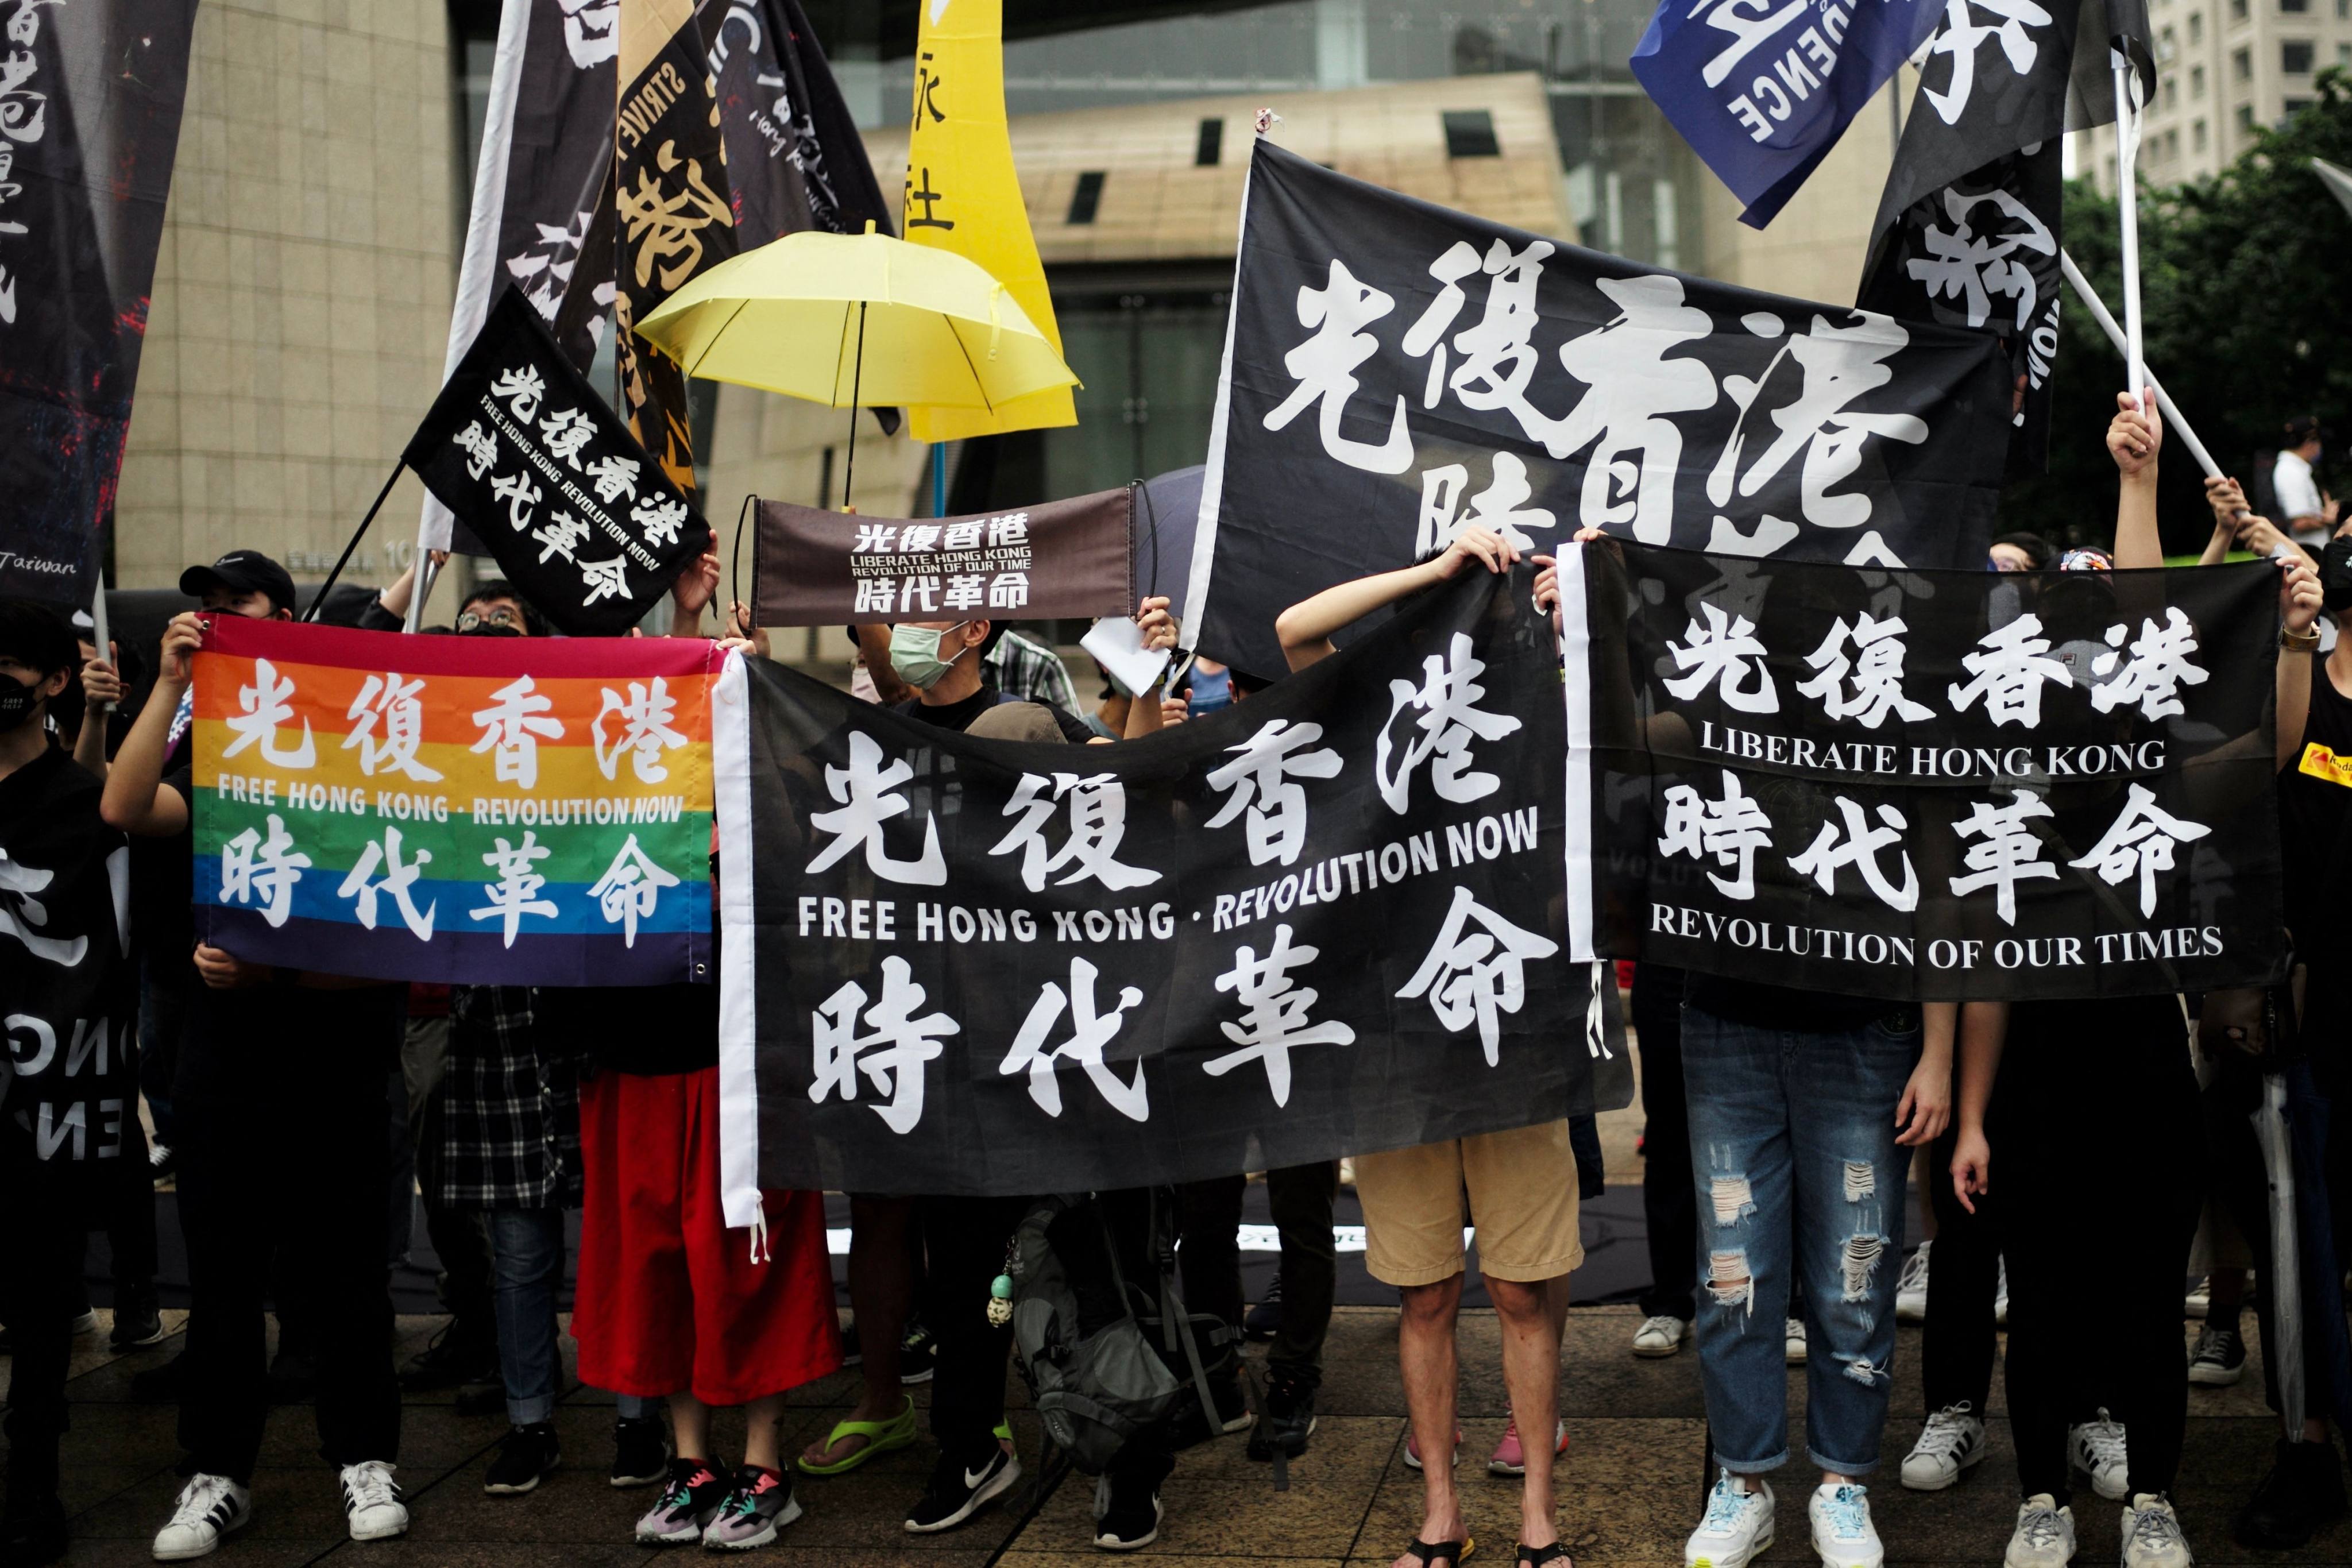 Activists hold flags that read “Free Hong Kong, Revolution Now” during a rally in Taipei on Sunday. Photo: AFP